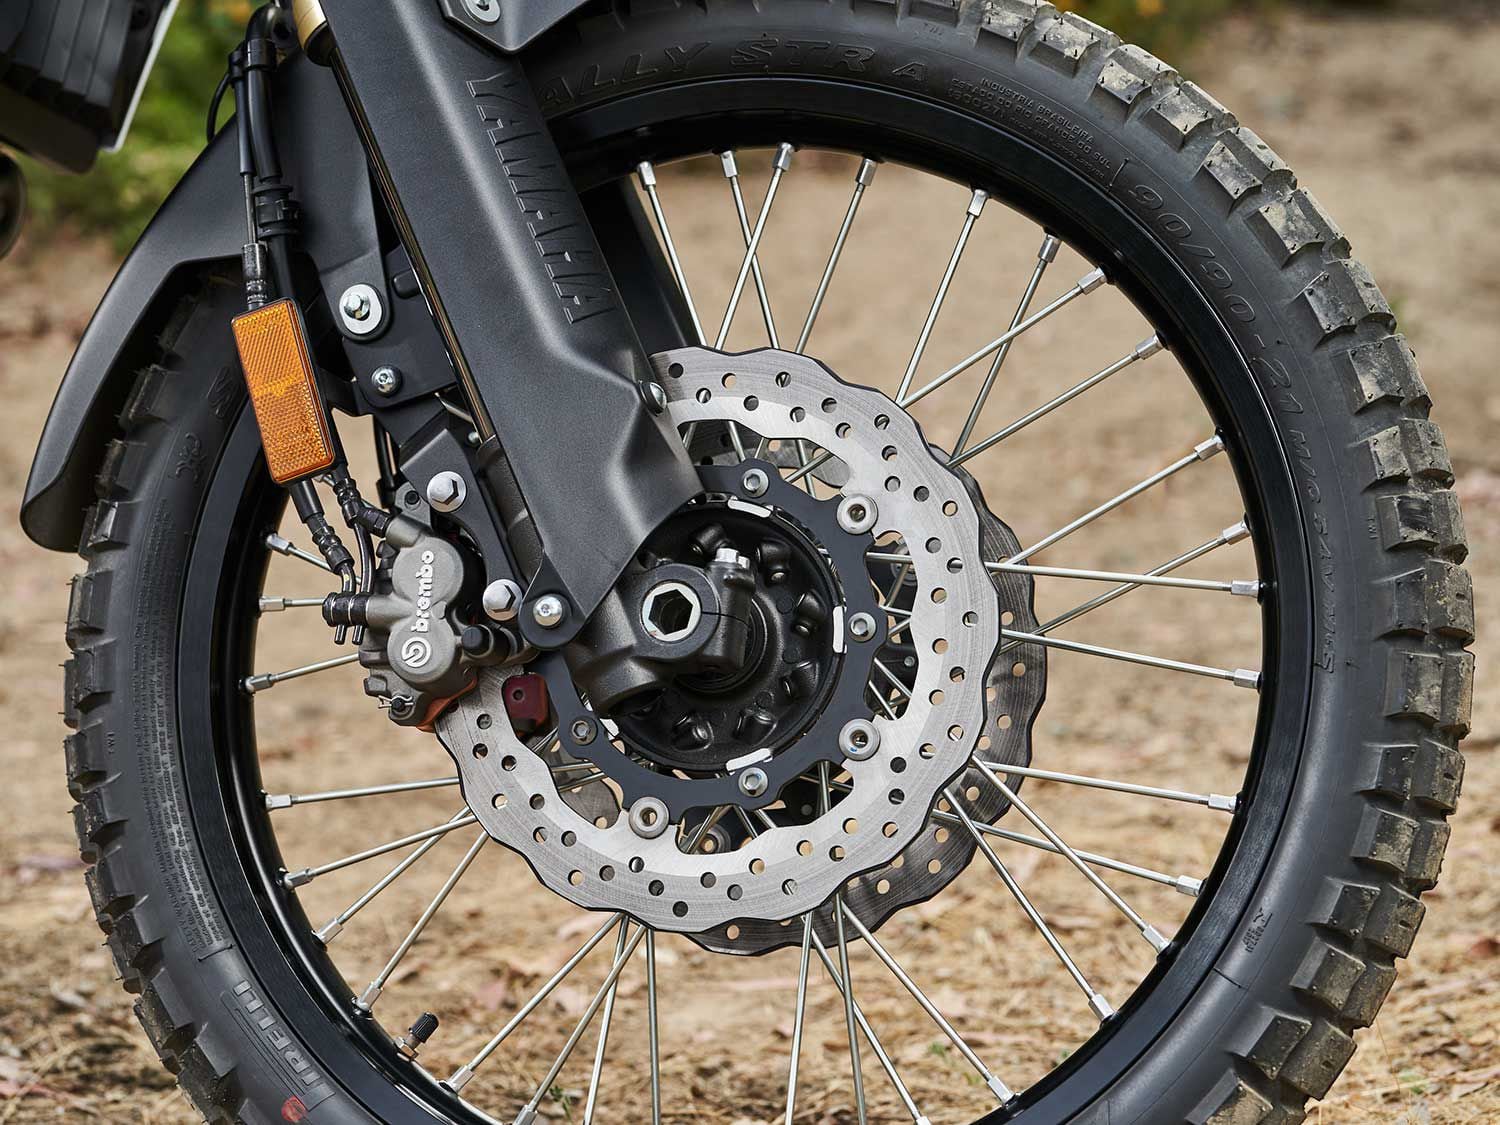 Although tiny-looking, the front brakes offer exceptional feel at the lever. This allows Yamaha riders to actuate the front brakes with confidence.